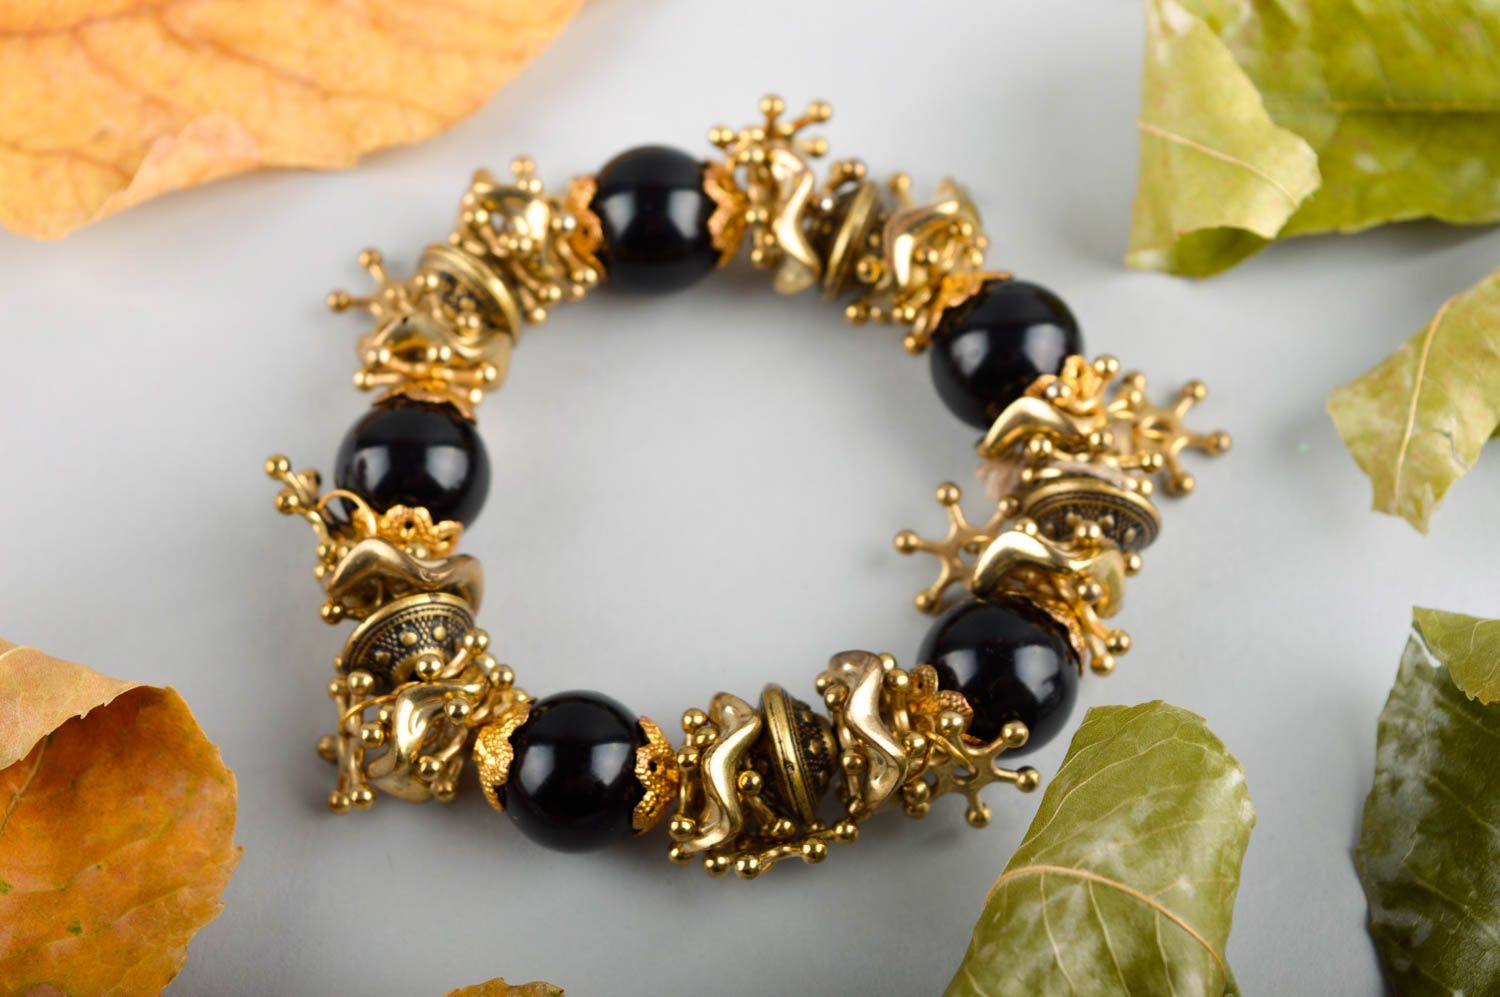 Elastic stretchy bracelet with black beads and golden color charms for teen girl photo 1